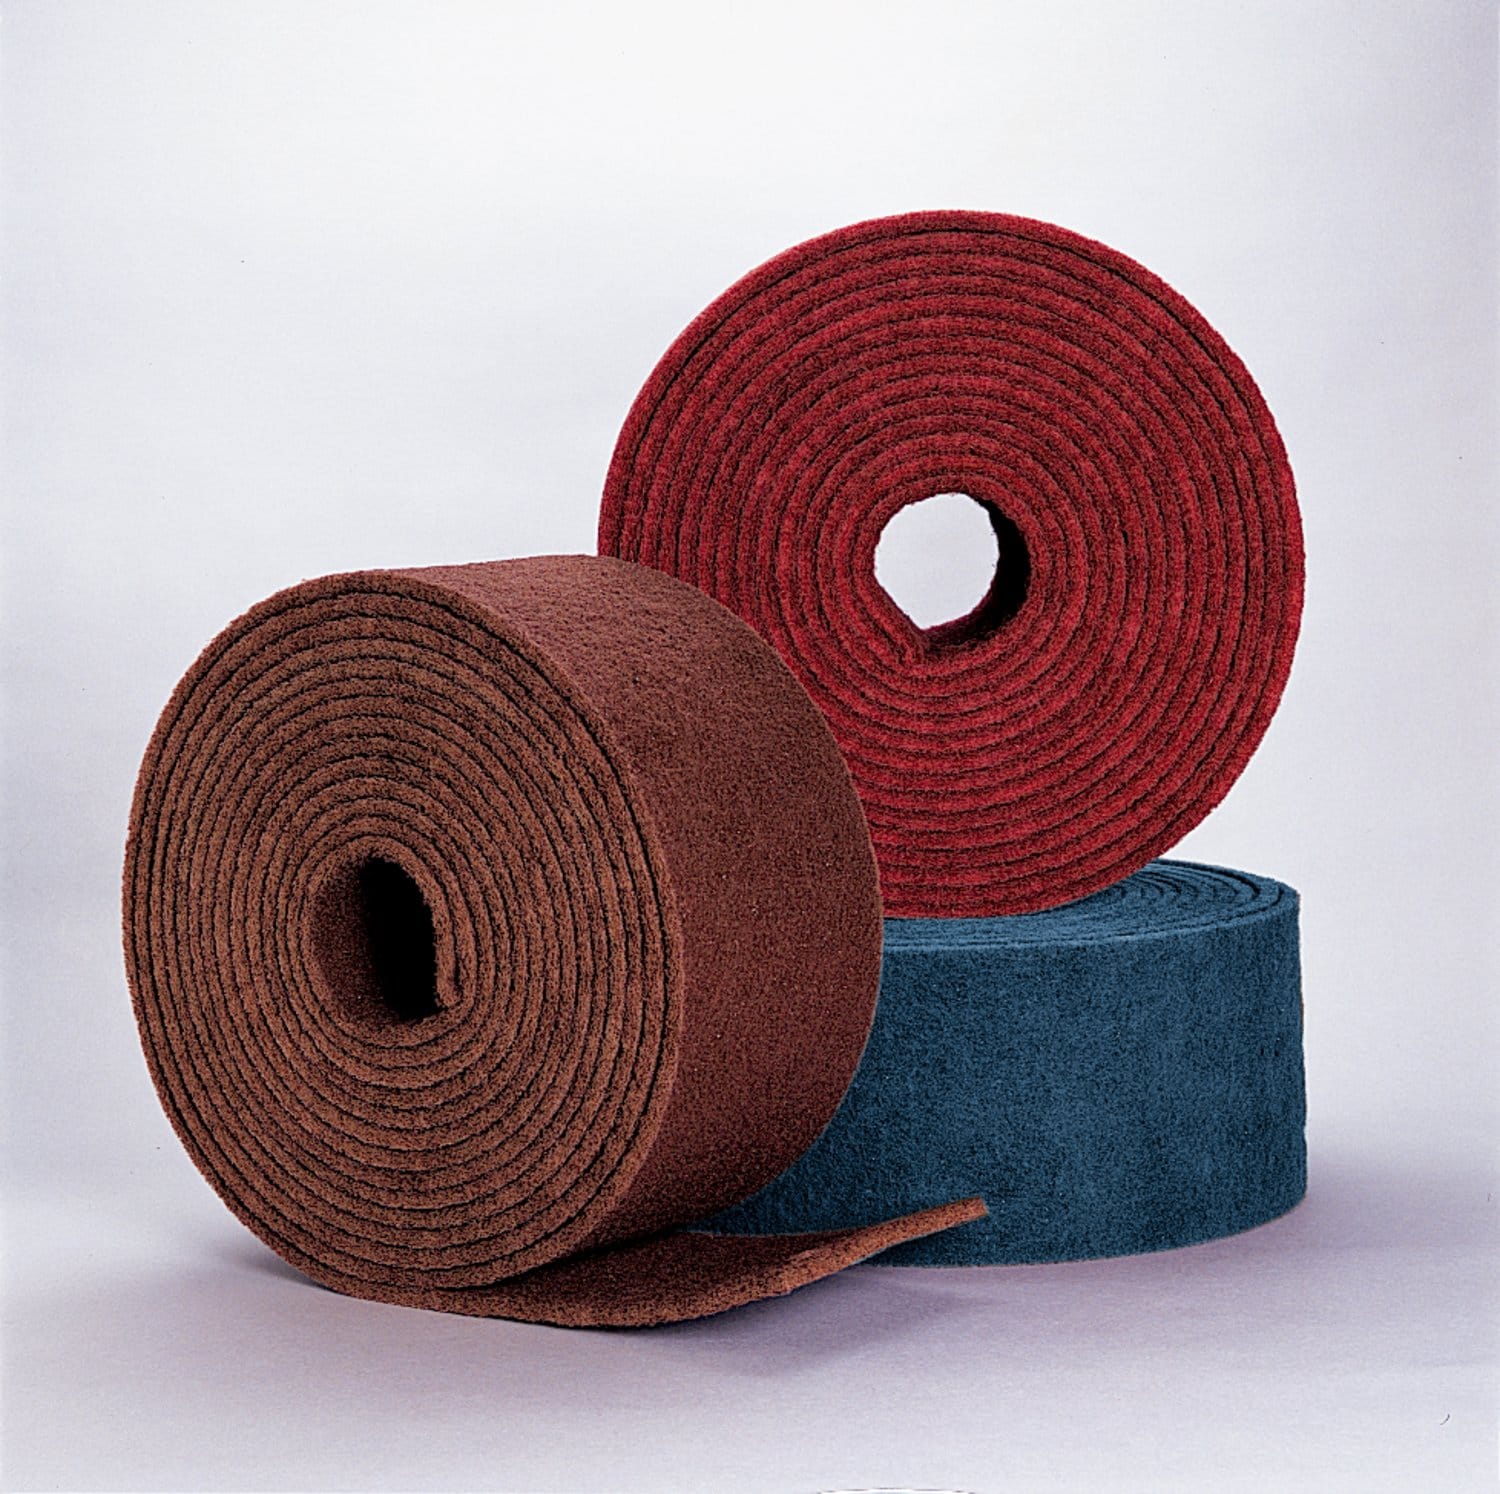 7010301180 - Standard Abrasives Surface Conditioning FE Roll 830028, 12-1/2 in x 25
yd CRS, 1 ea/Case